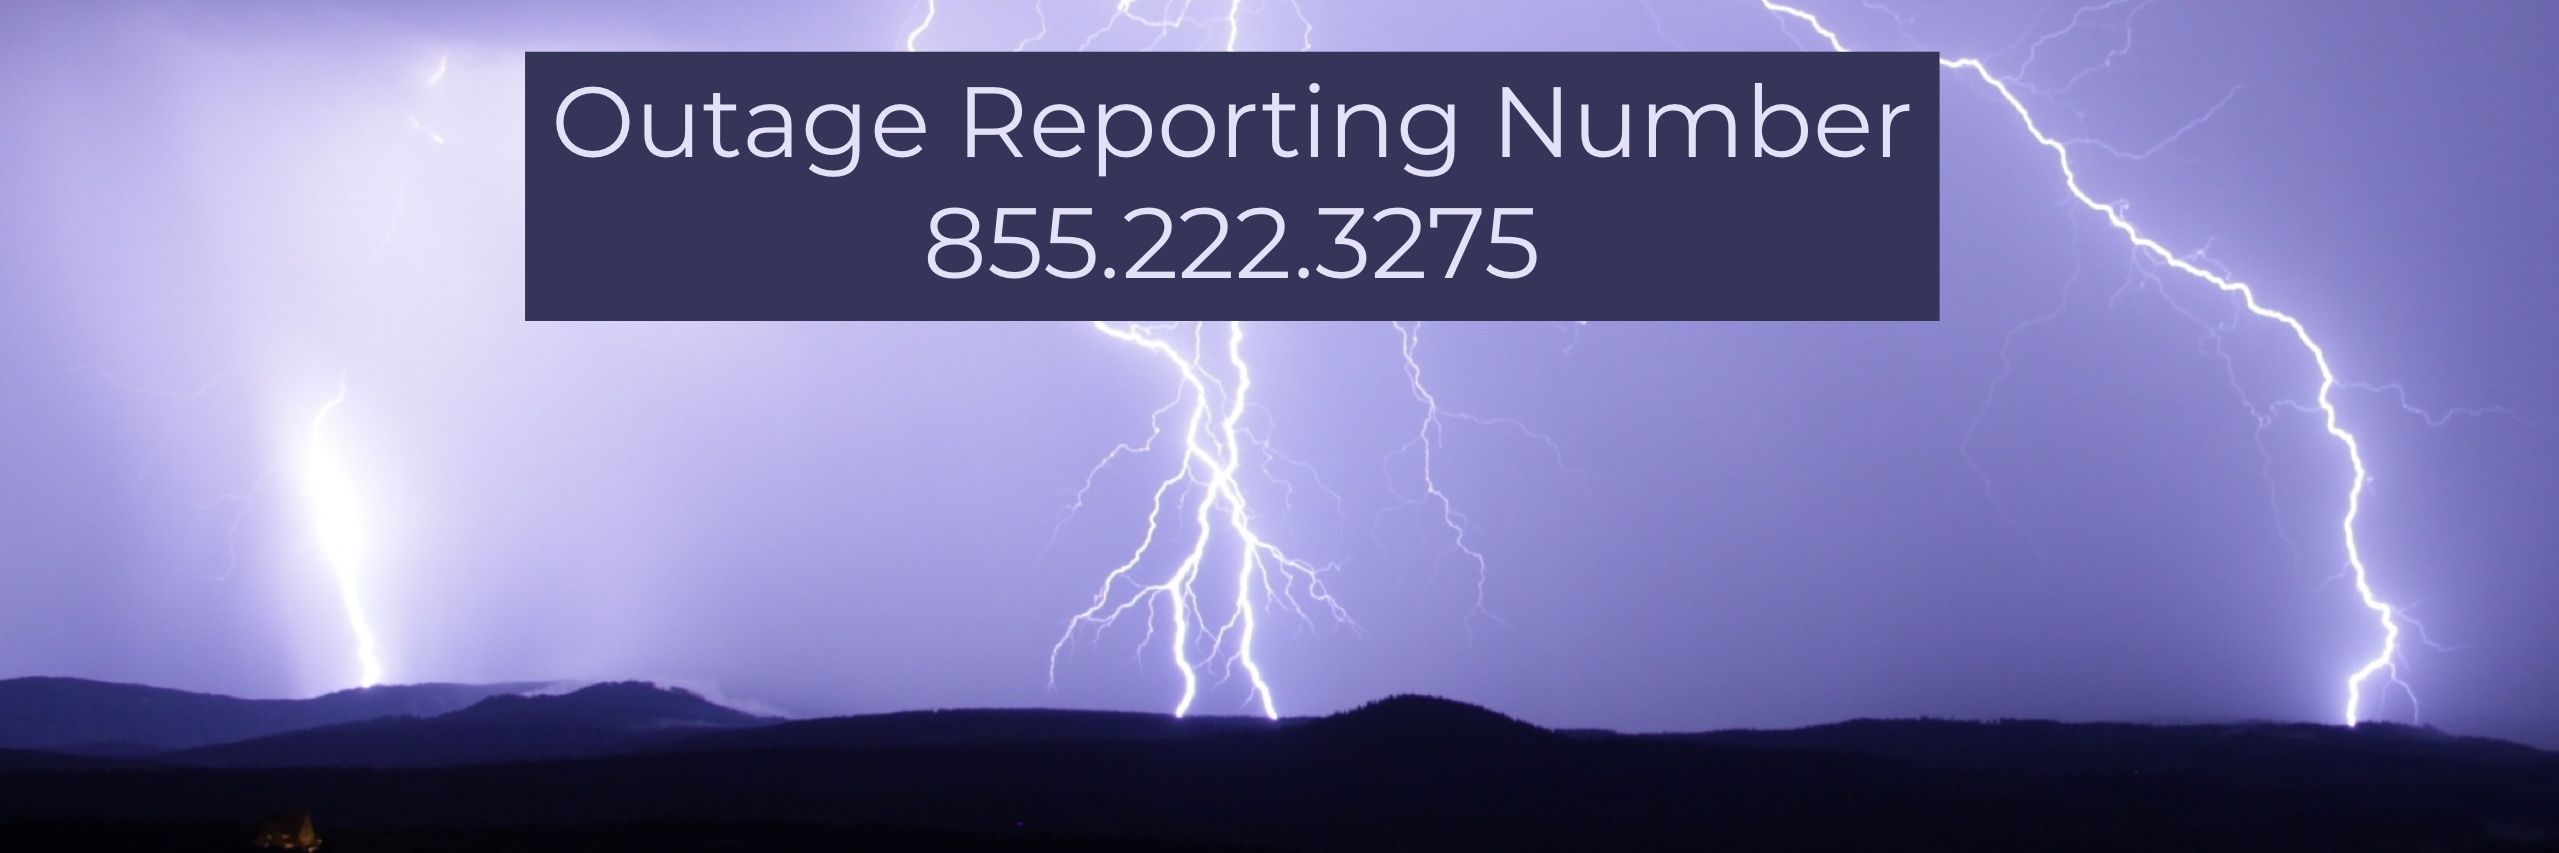 Outage Reporting Number